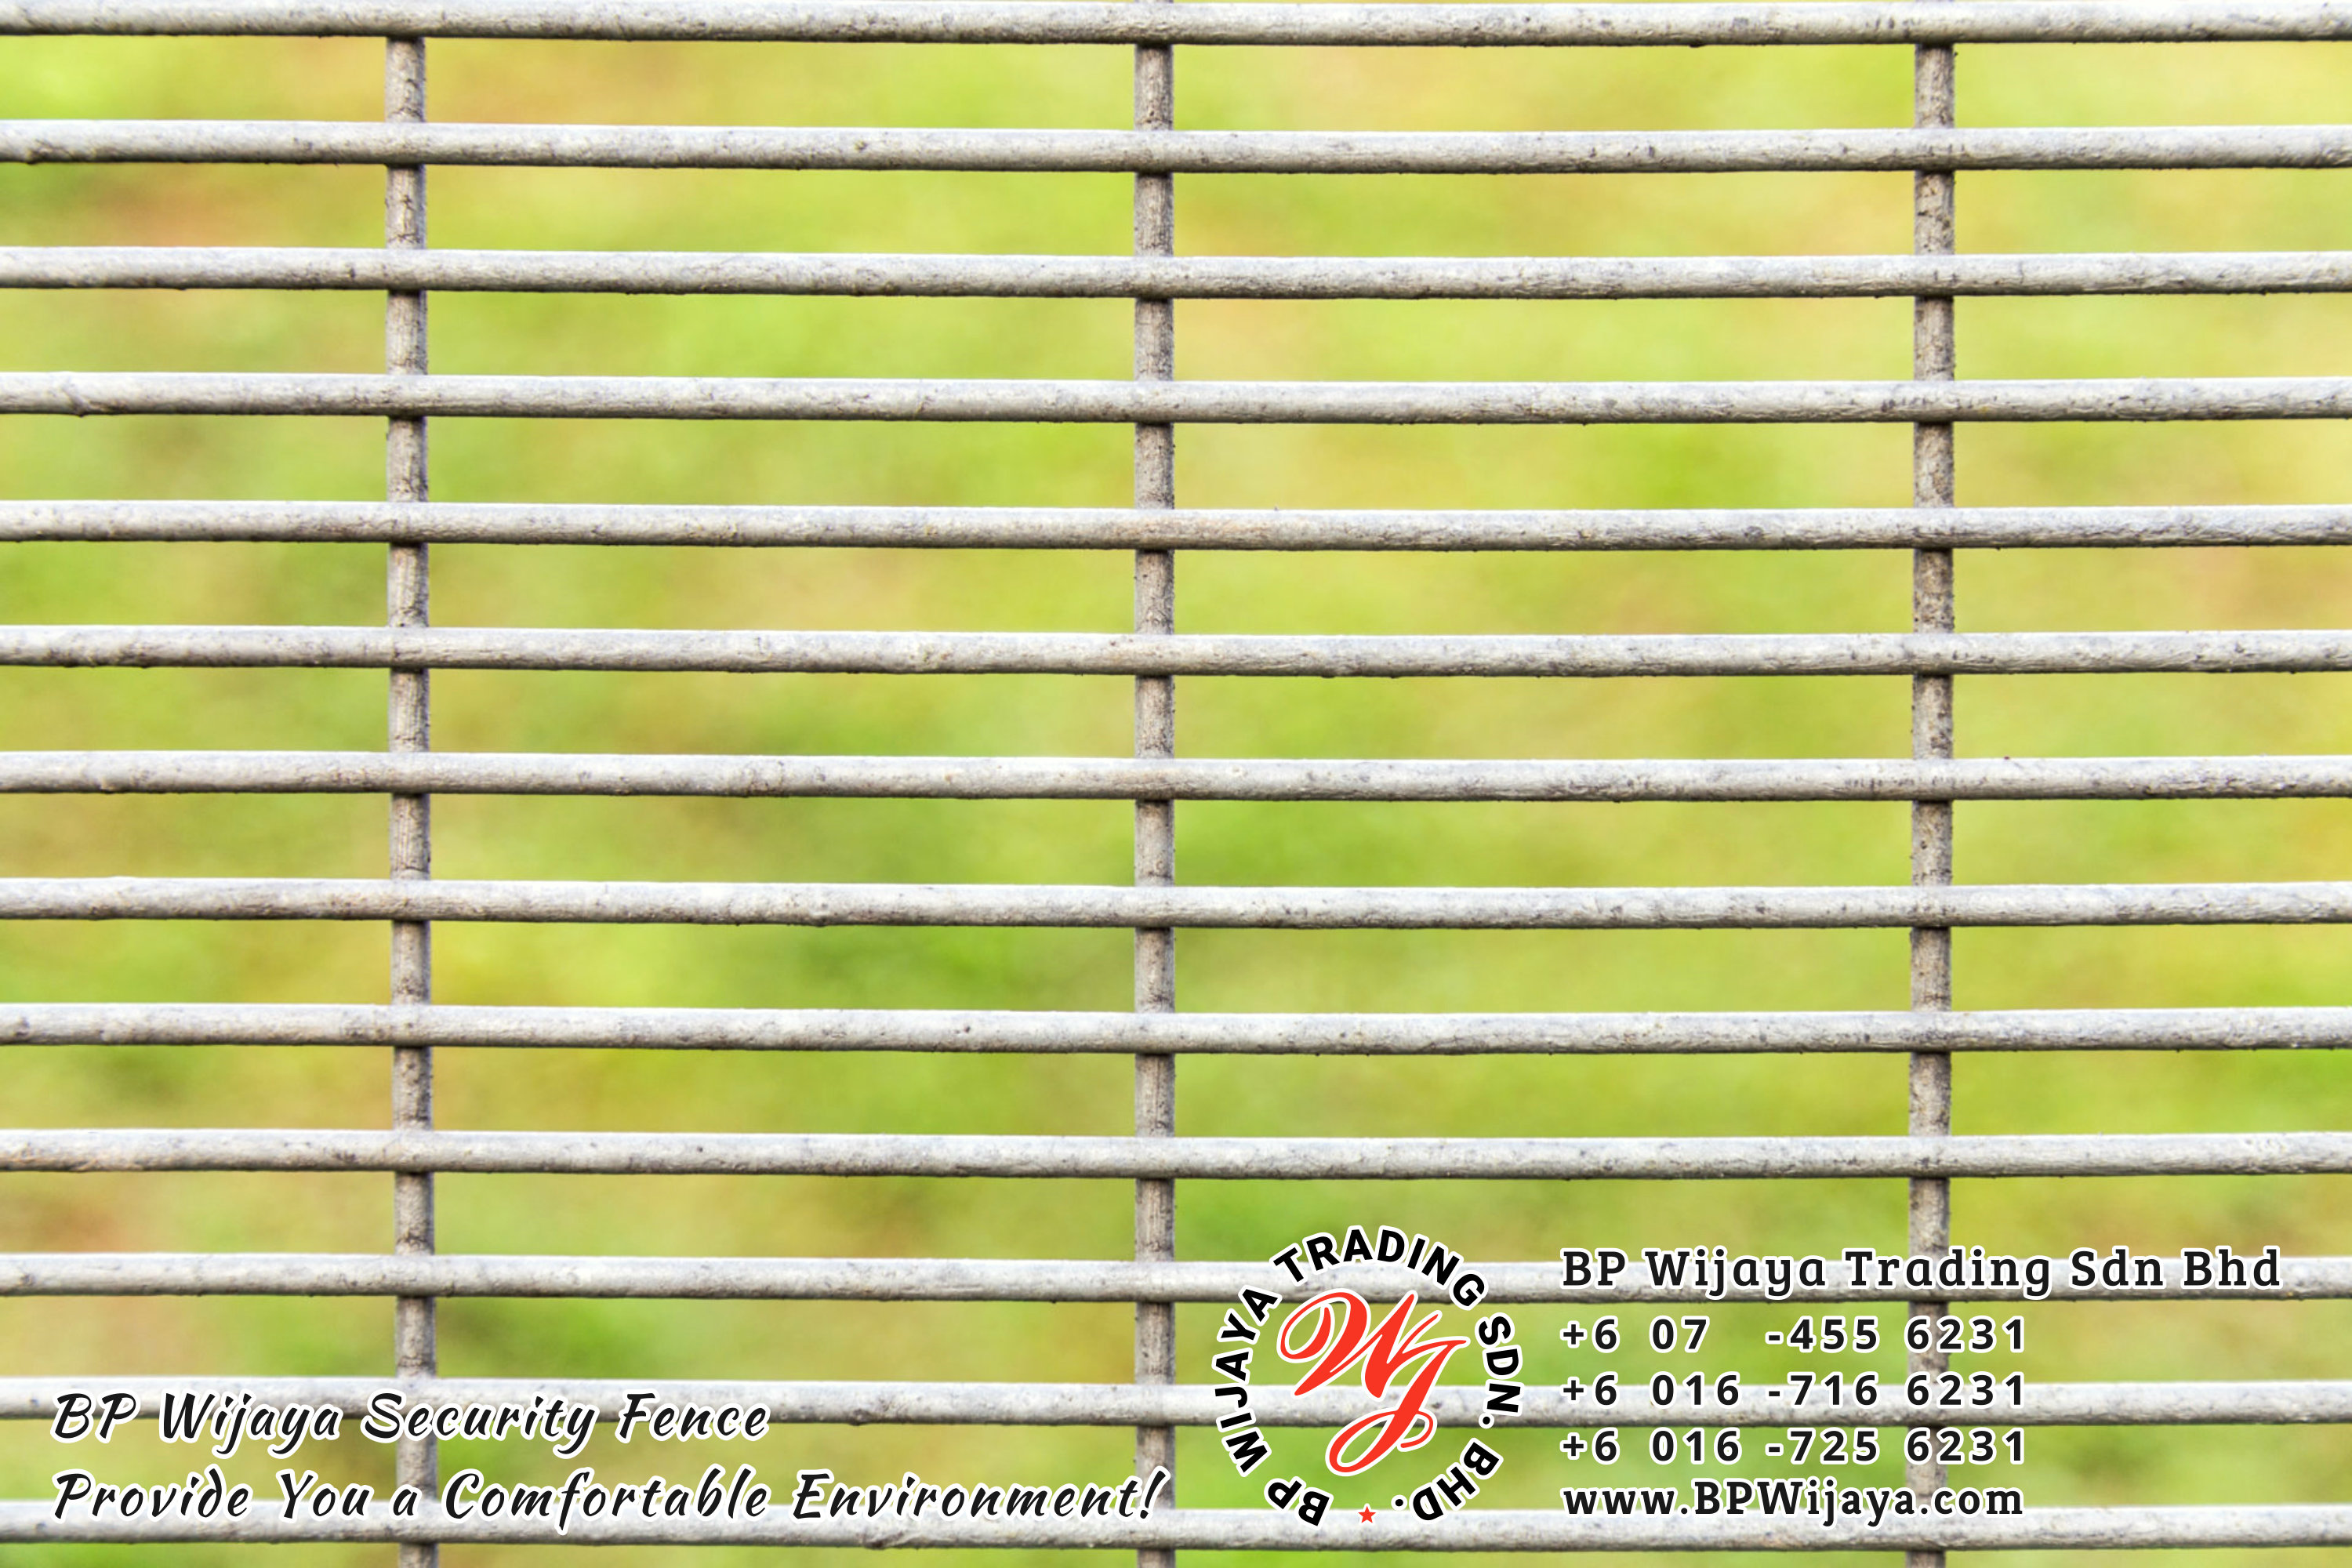 BP Wijaya Trading Sdn Bhd Malaysia Selangor Kuala Lumpur manufacturer of safety fences building materials for housing construction site Security fencing factory security home security A02-02